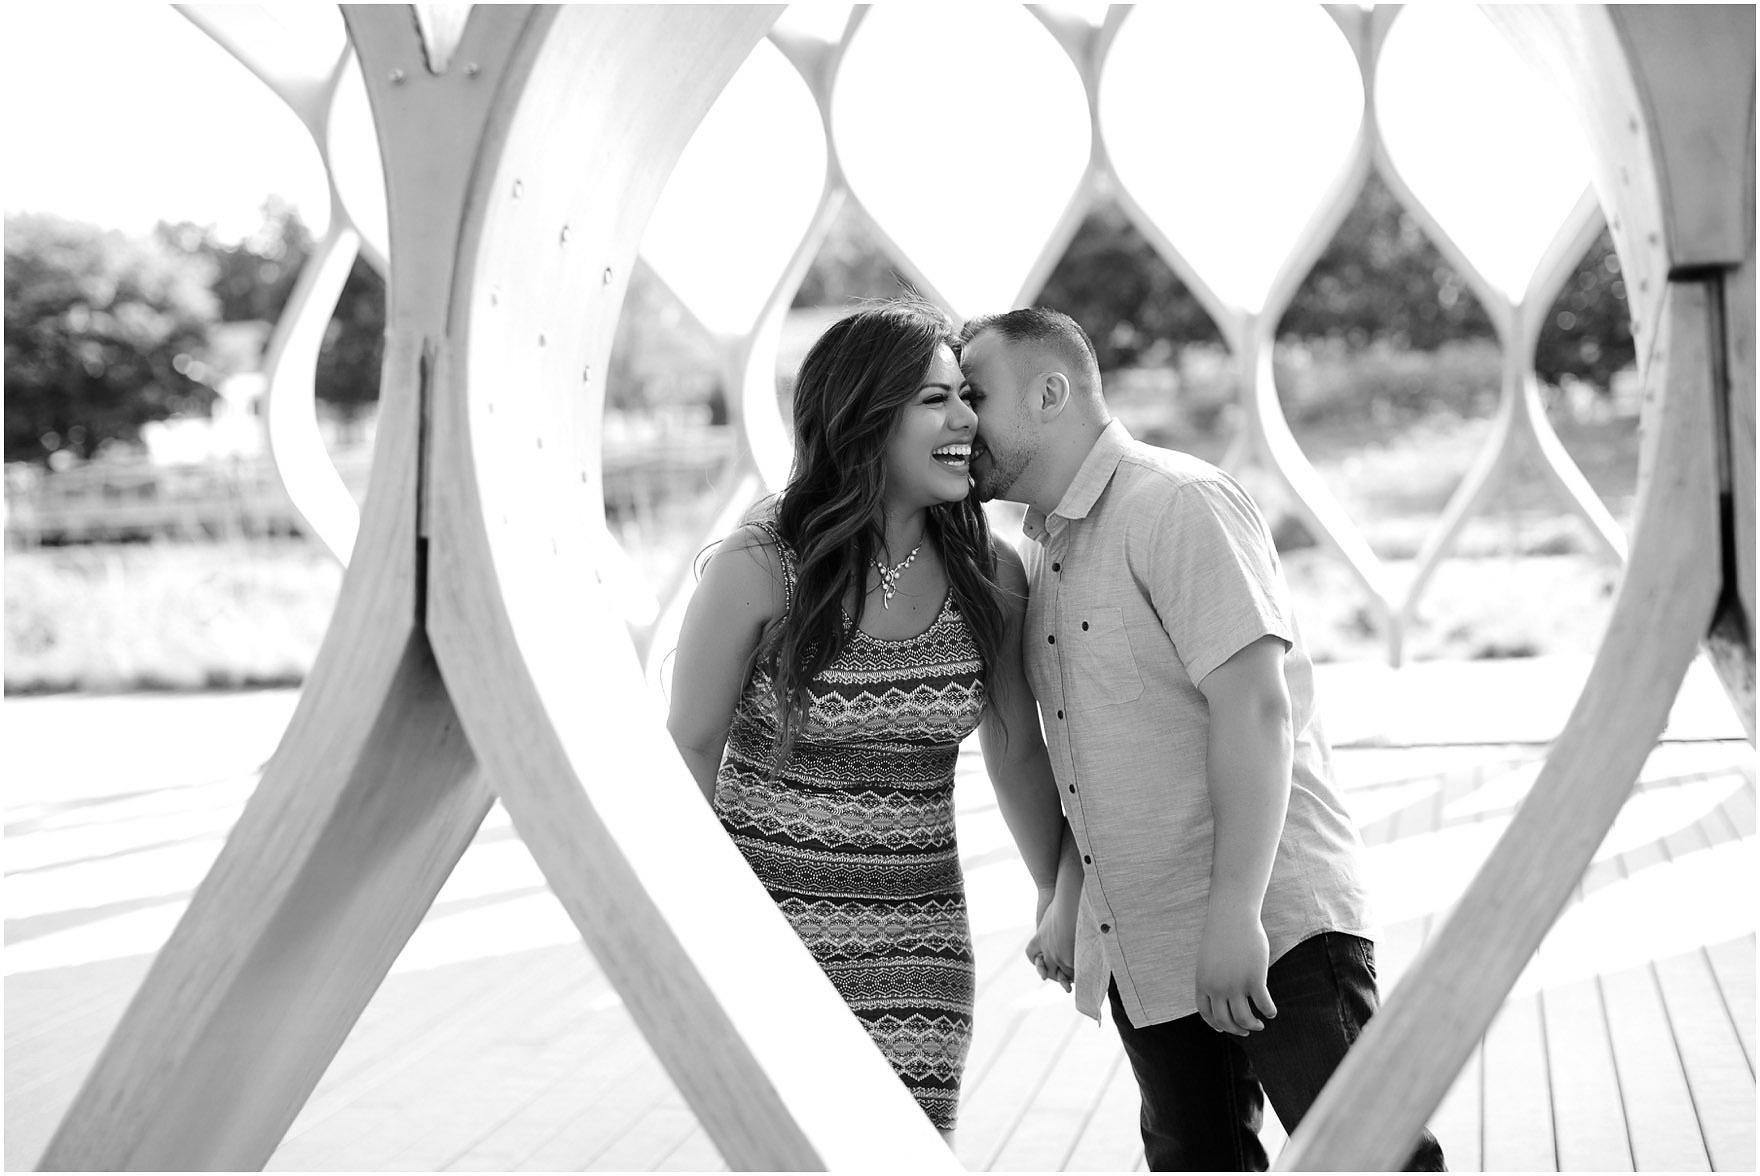 LincolnParkZooEngagementPhotosLincolnParkEngagementPhotosHoneycombEngagementChicagoEngagementPhotographer__0013